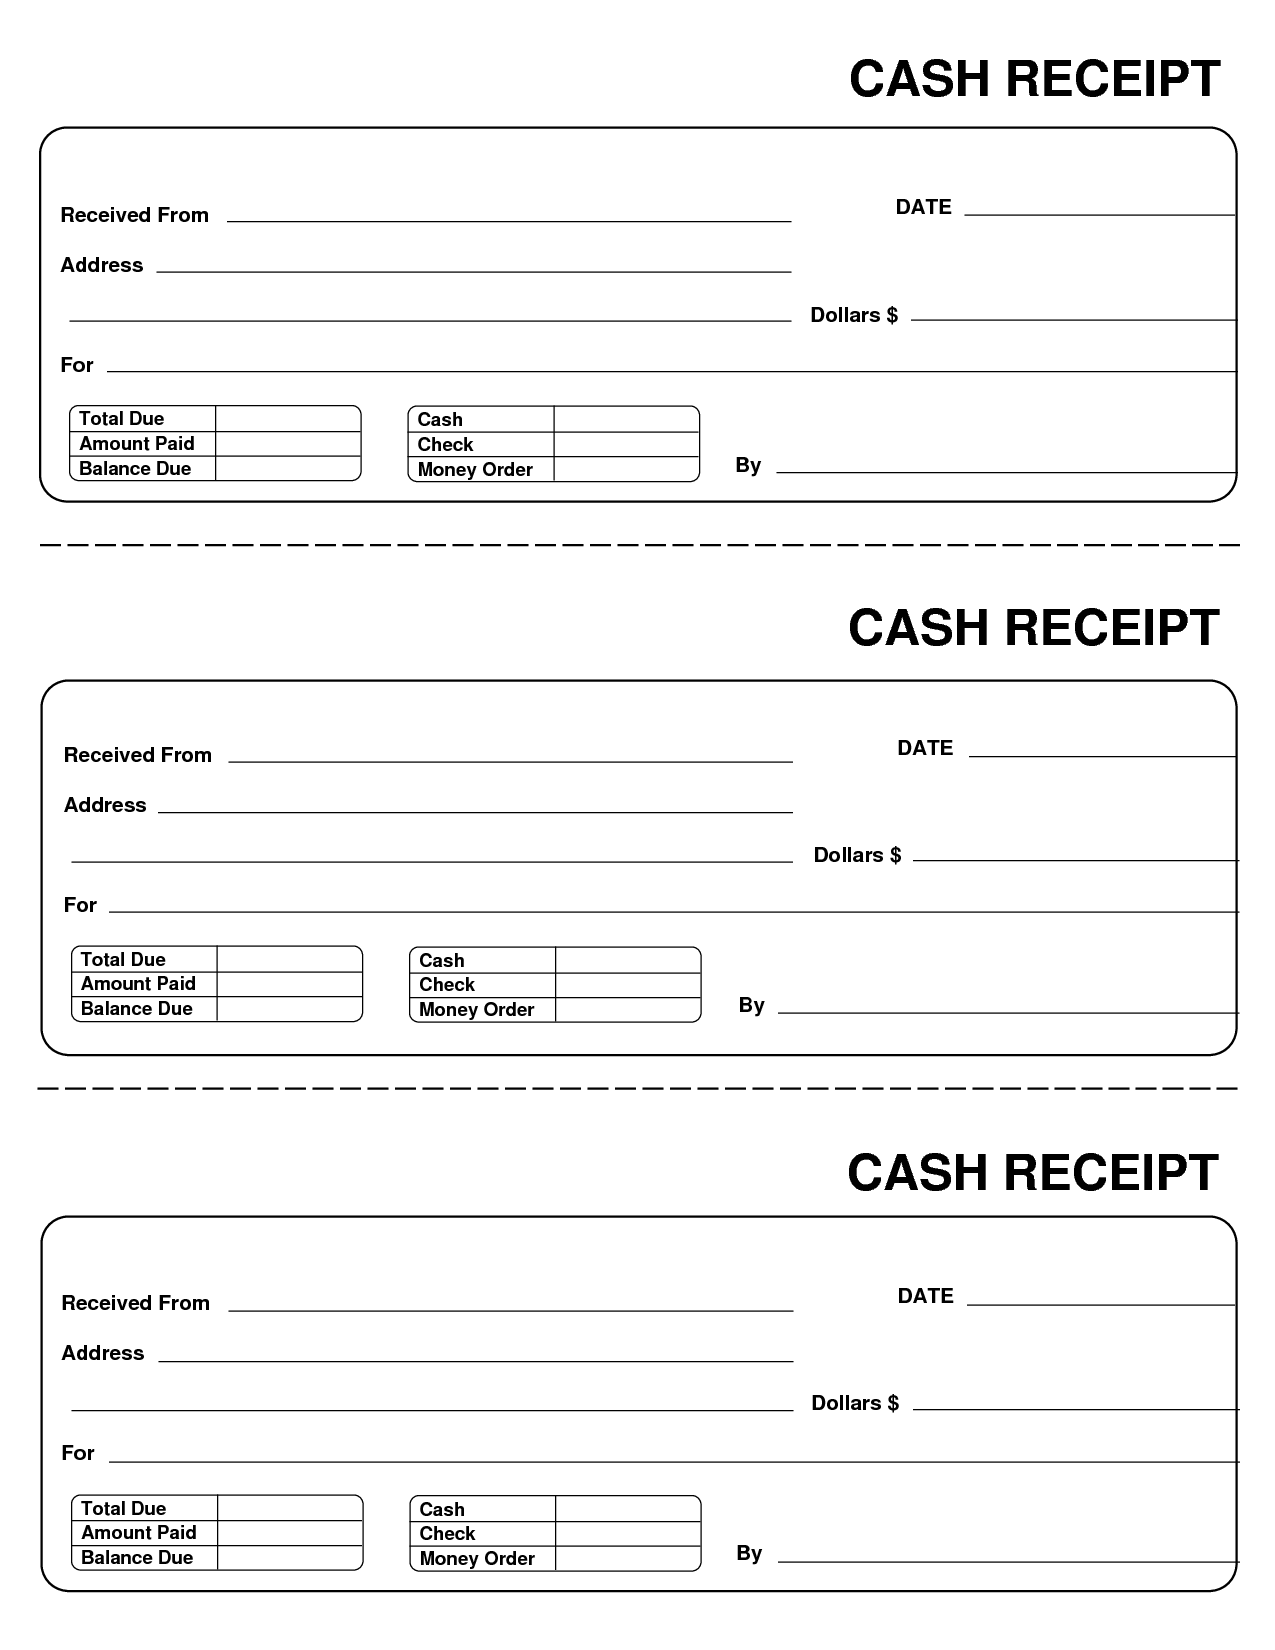 Printable Cash Receipt Template , Cash Receipt Template to Use and 